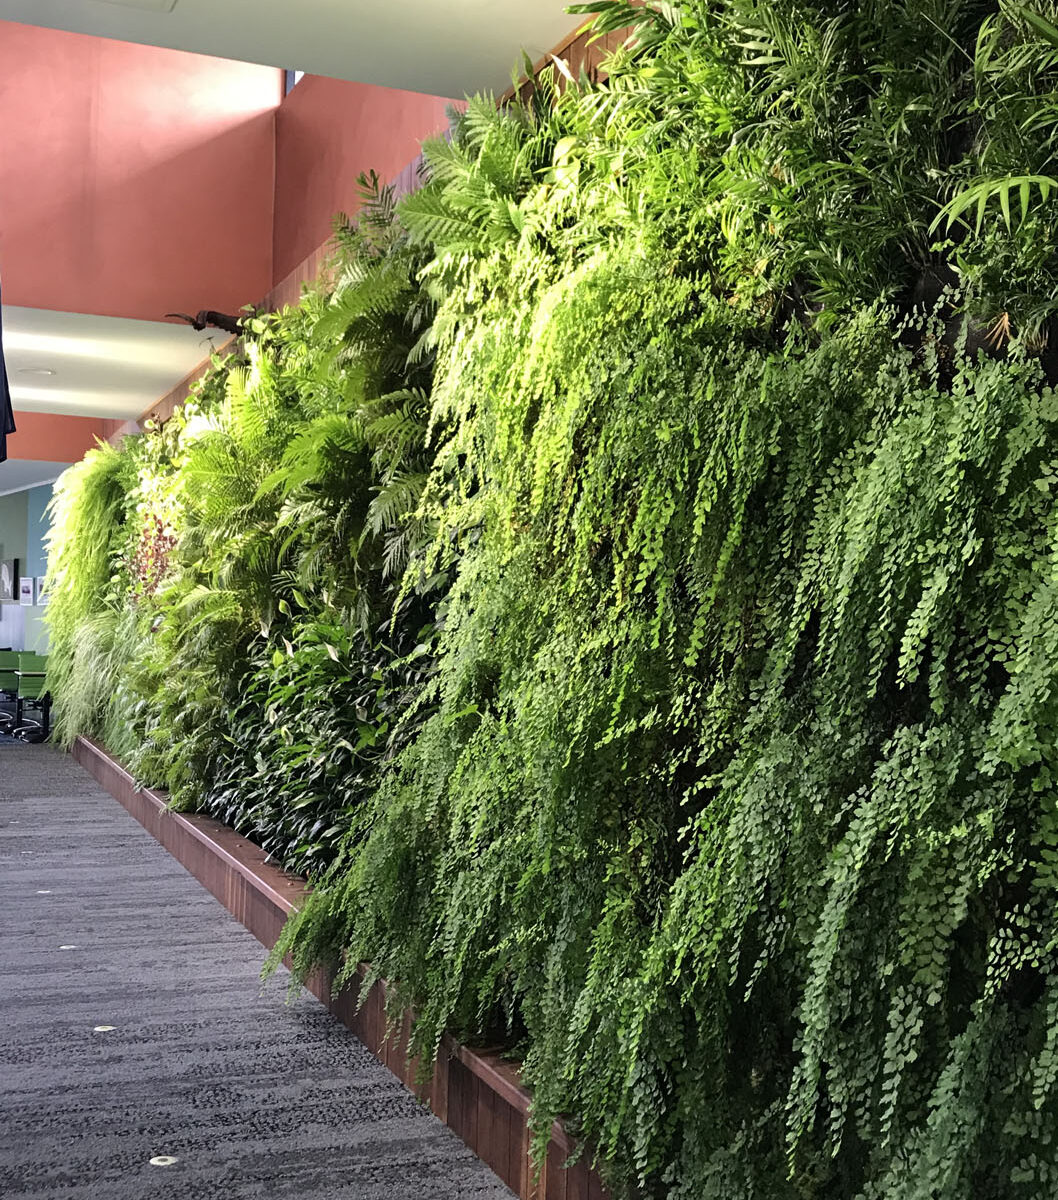 Maidenhair Ferns (Adiantum sp.) in the green wall softens the built environment as their delicate fronds help to reflect light